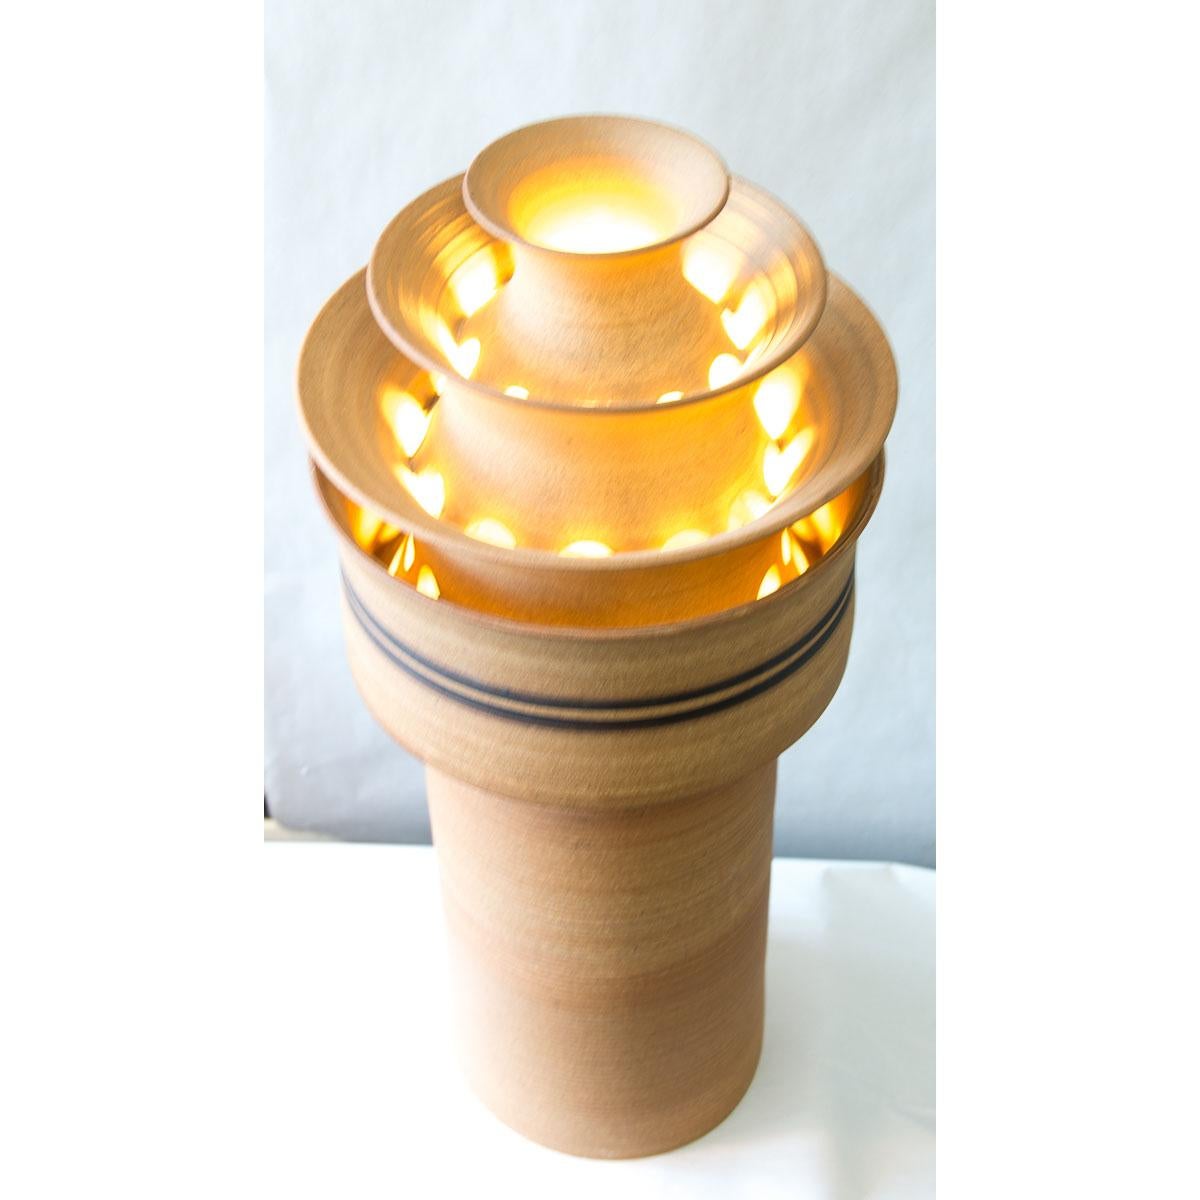 Arne Bang Original Vintage Stoneware Lamp In Good Condition For Sale In East Hampton, NY